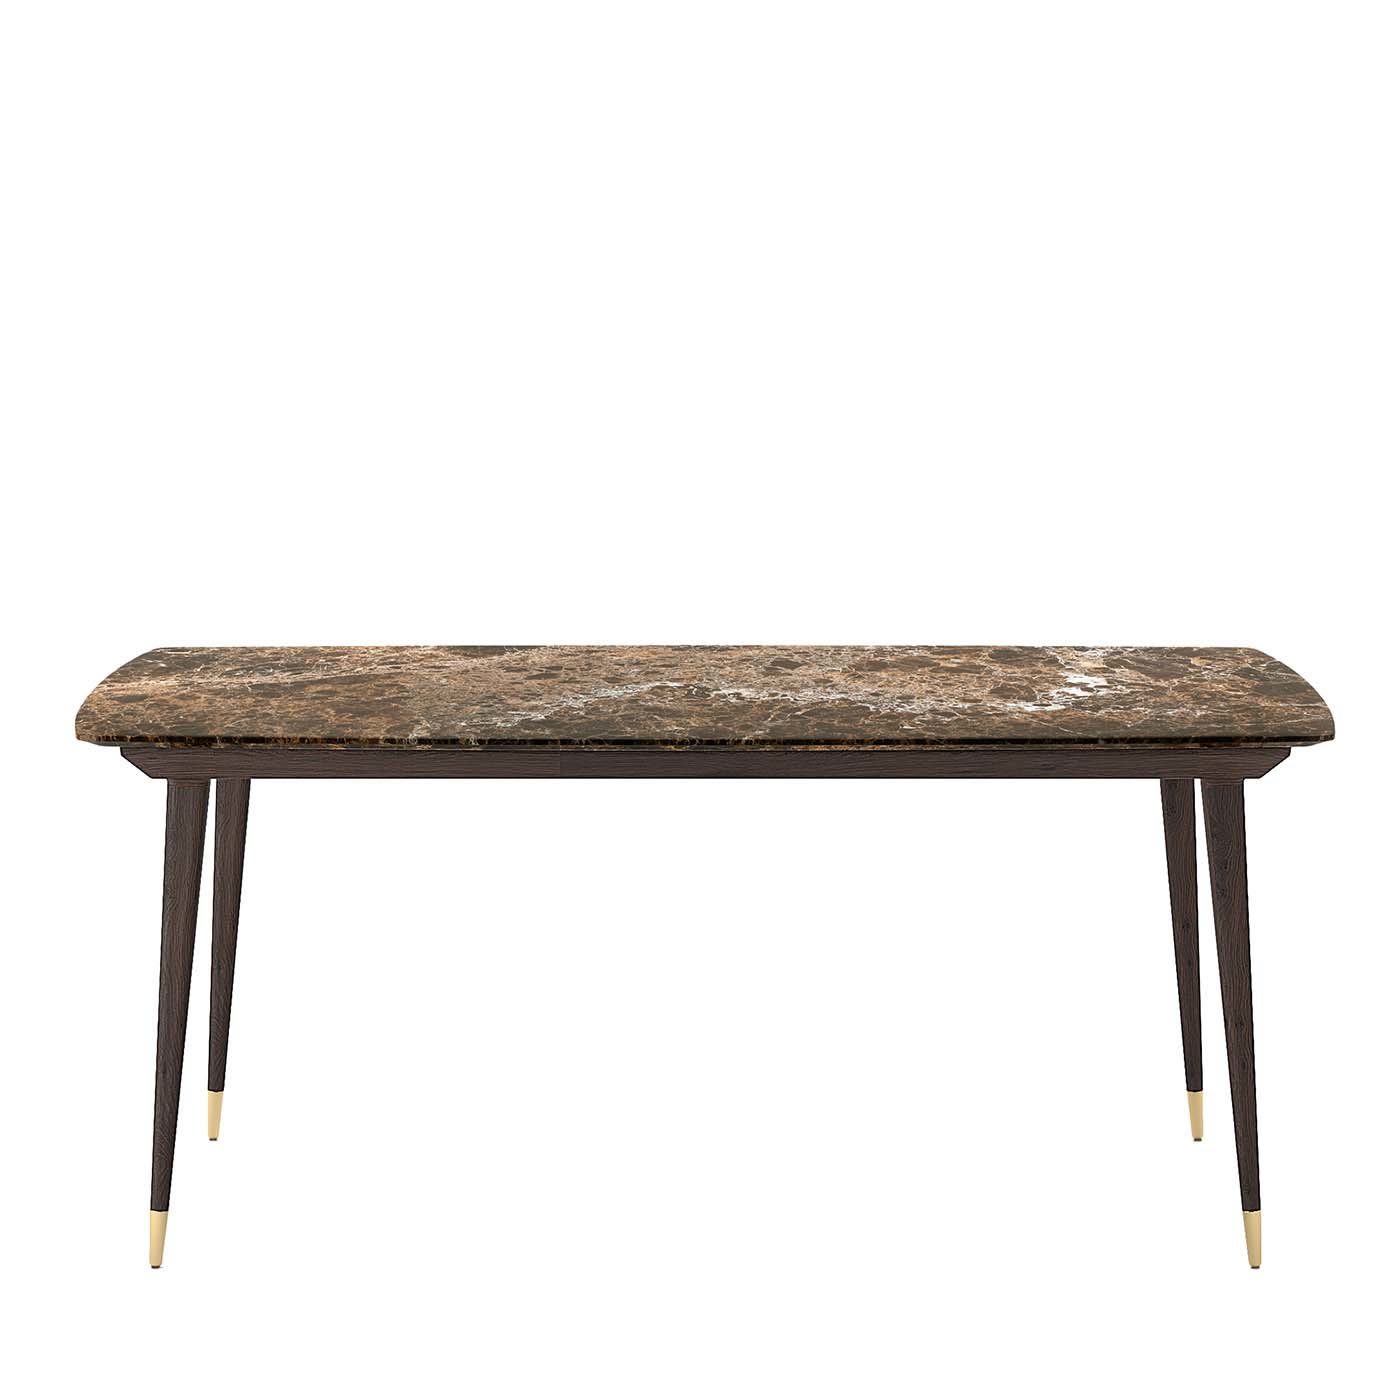 Coco Marble Table - Callesella